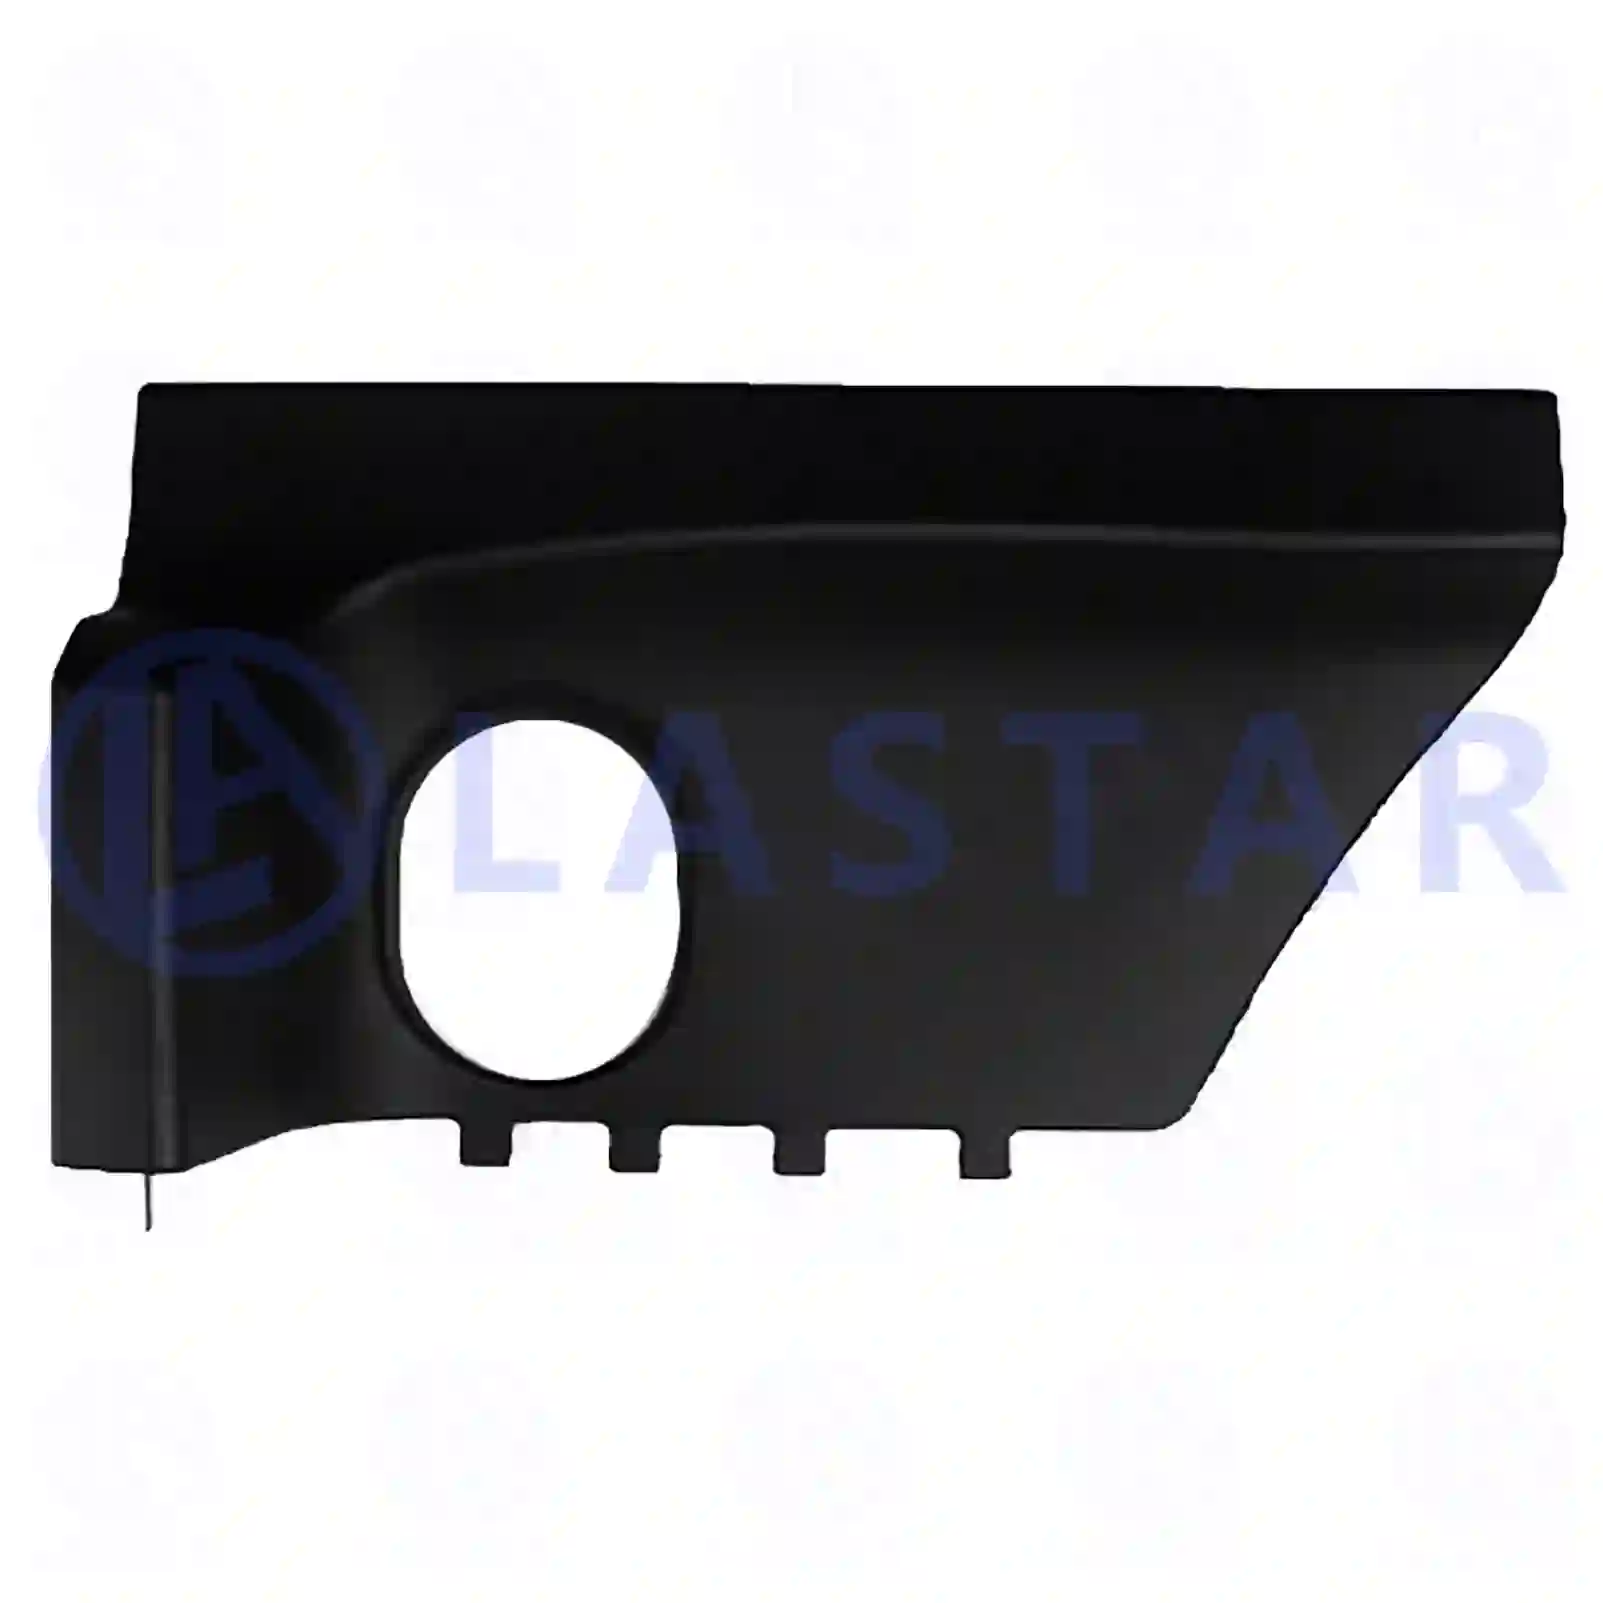 Cover, left, 77721517, 1390075, ZG60462-0008 ||  77721517 Lastar Spare Part | Truck Spare Parts, Auotomotive Spare Parts Cover, left, 77721517, 1390075, ZG60462-0008 ||  77721517 Lastar Spare Part | Truck Spare Parts, Auotomotive Spare Parts